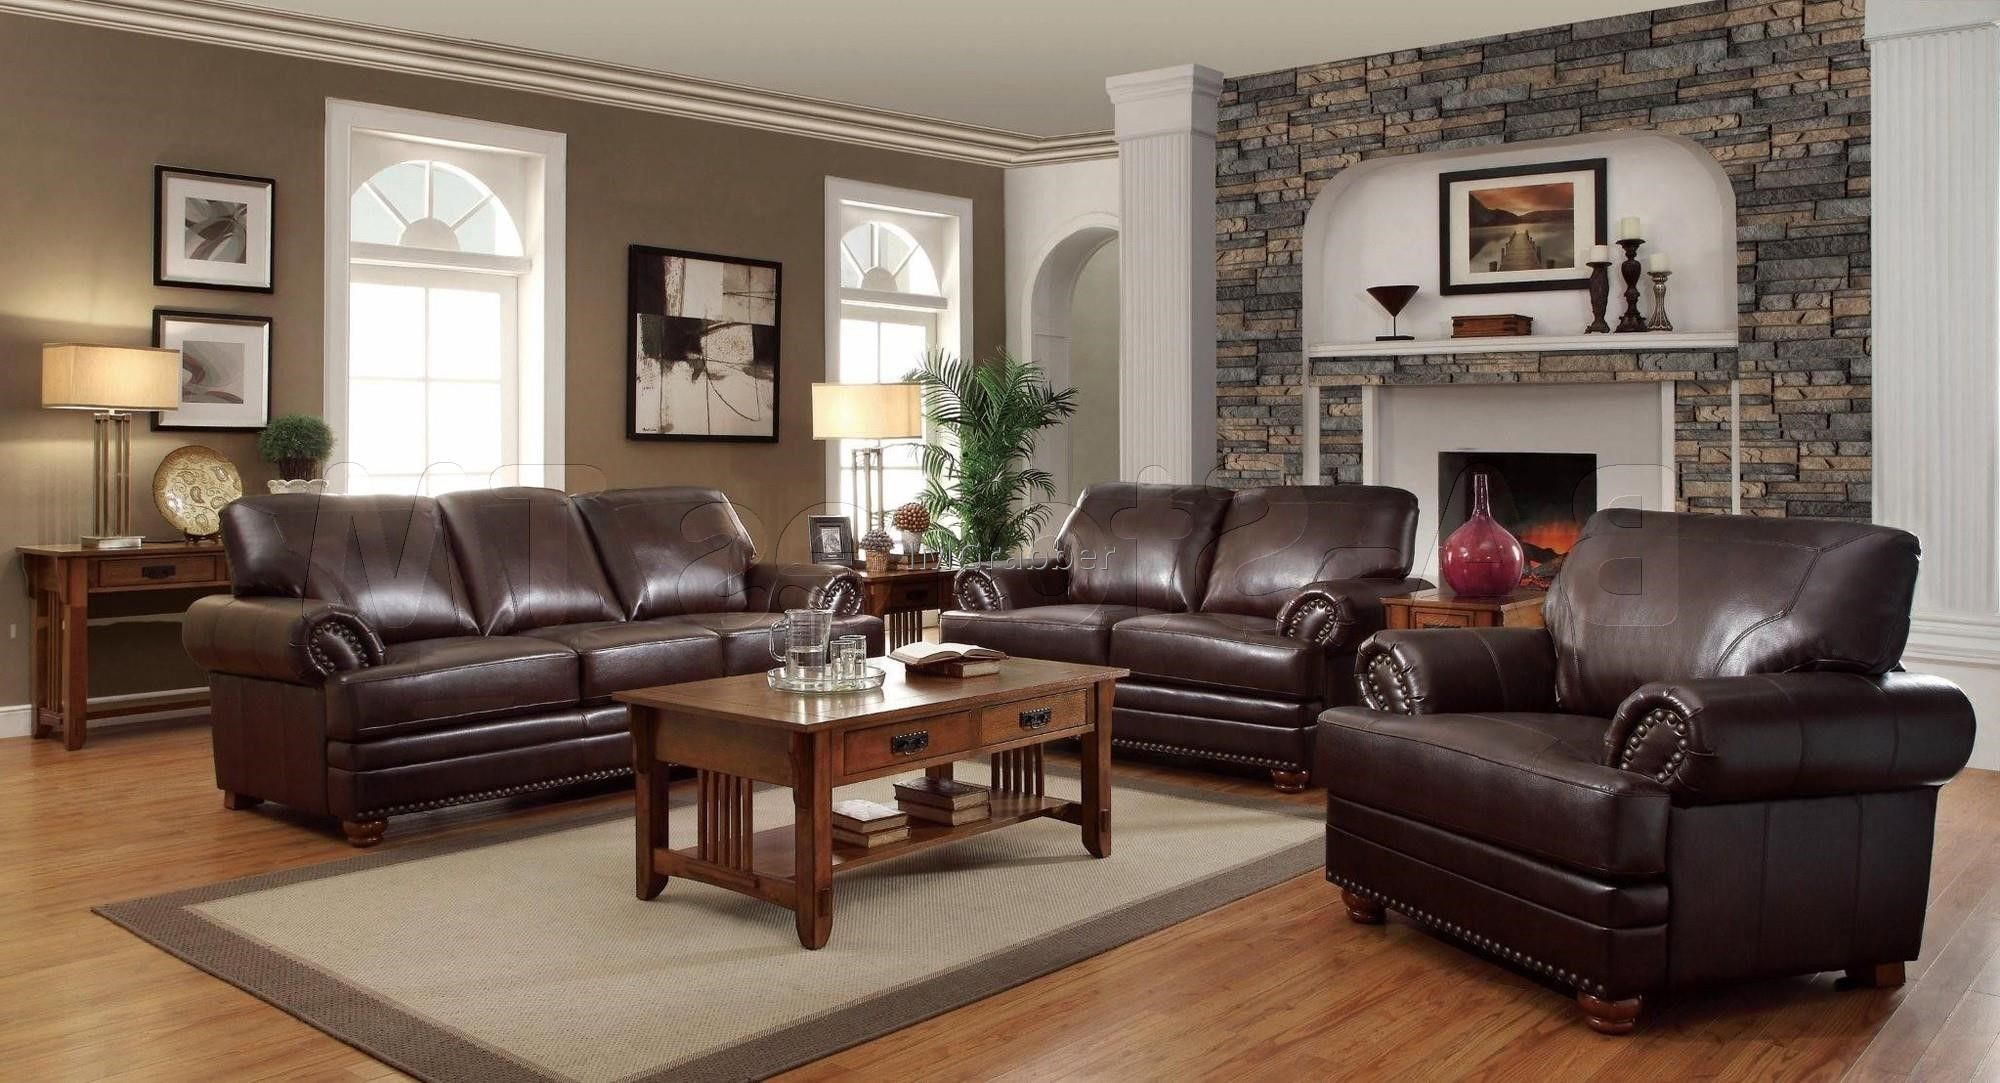 Colour Schemes To Go With Dark Brown Leather Sofa • Patio Ideas